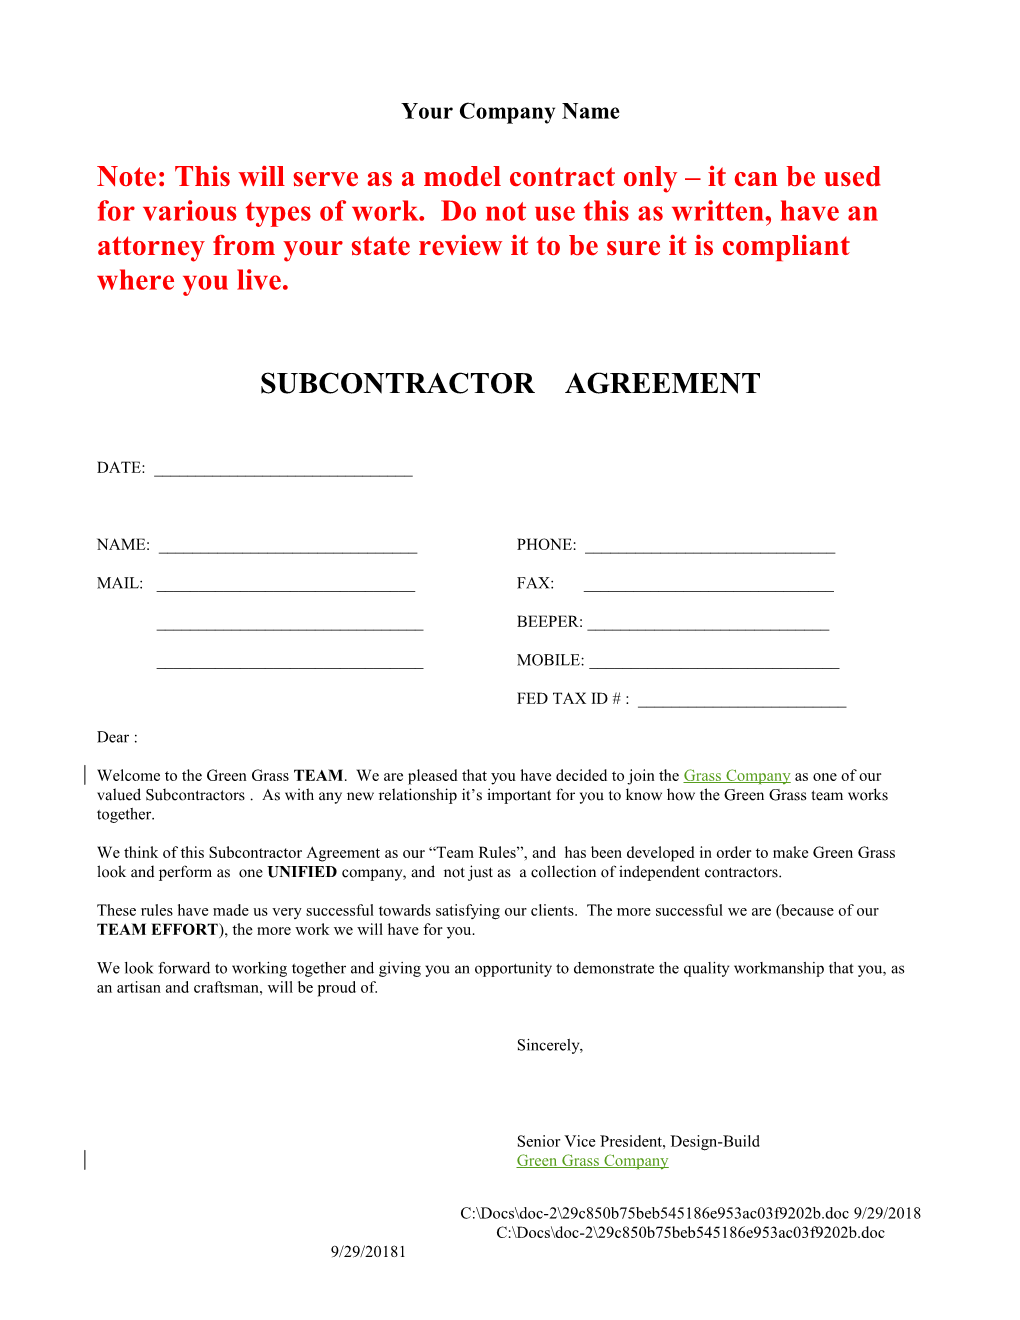 Subcontractor Contract Agreement